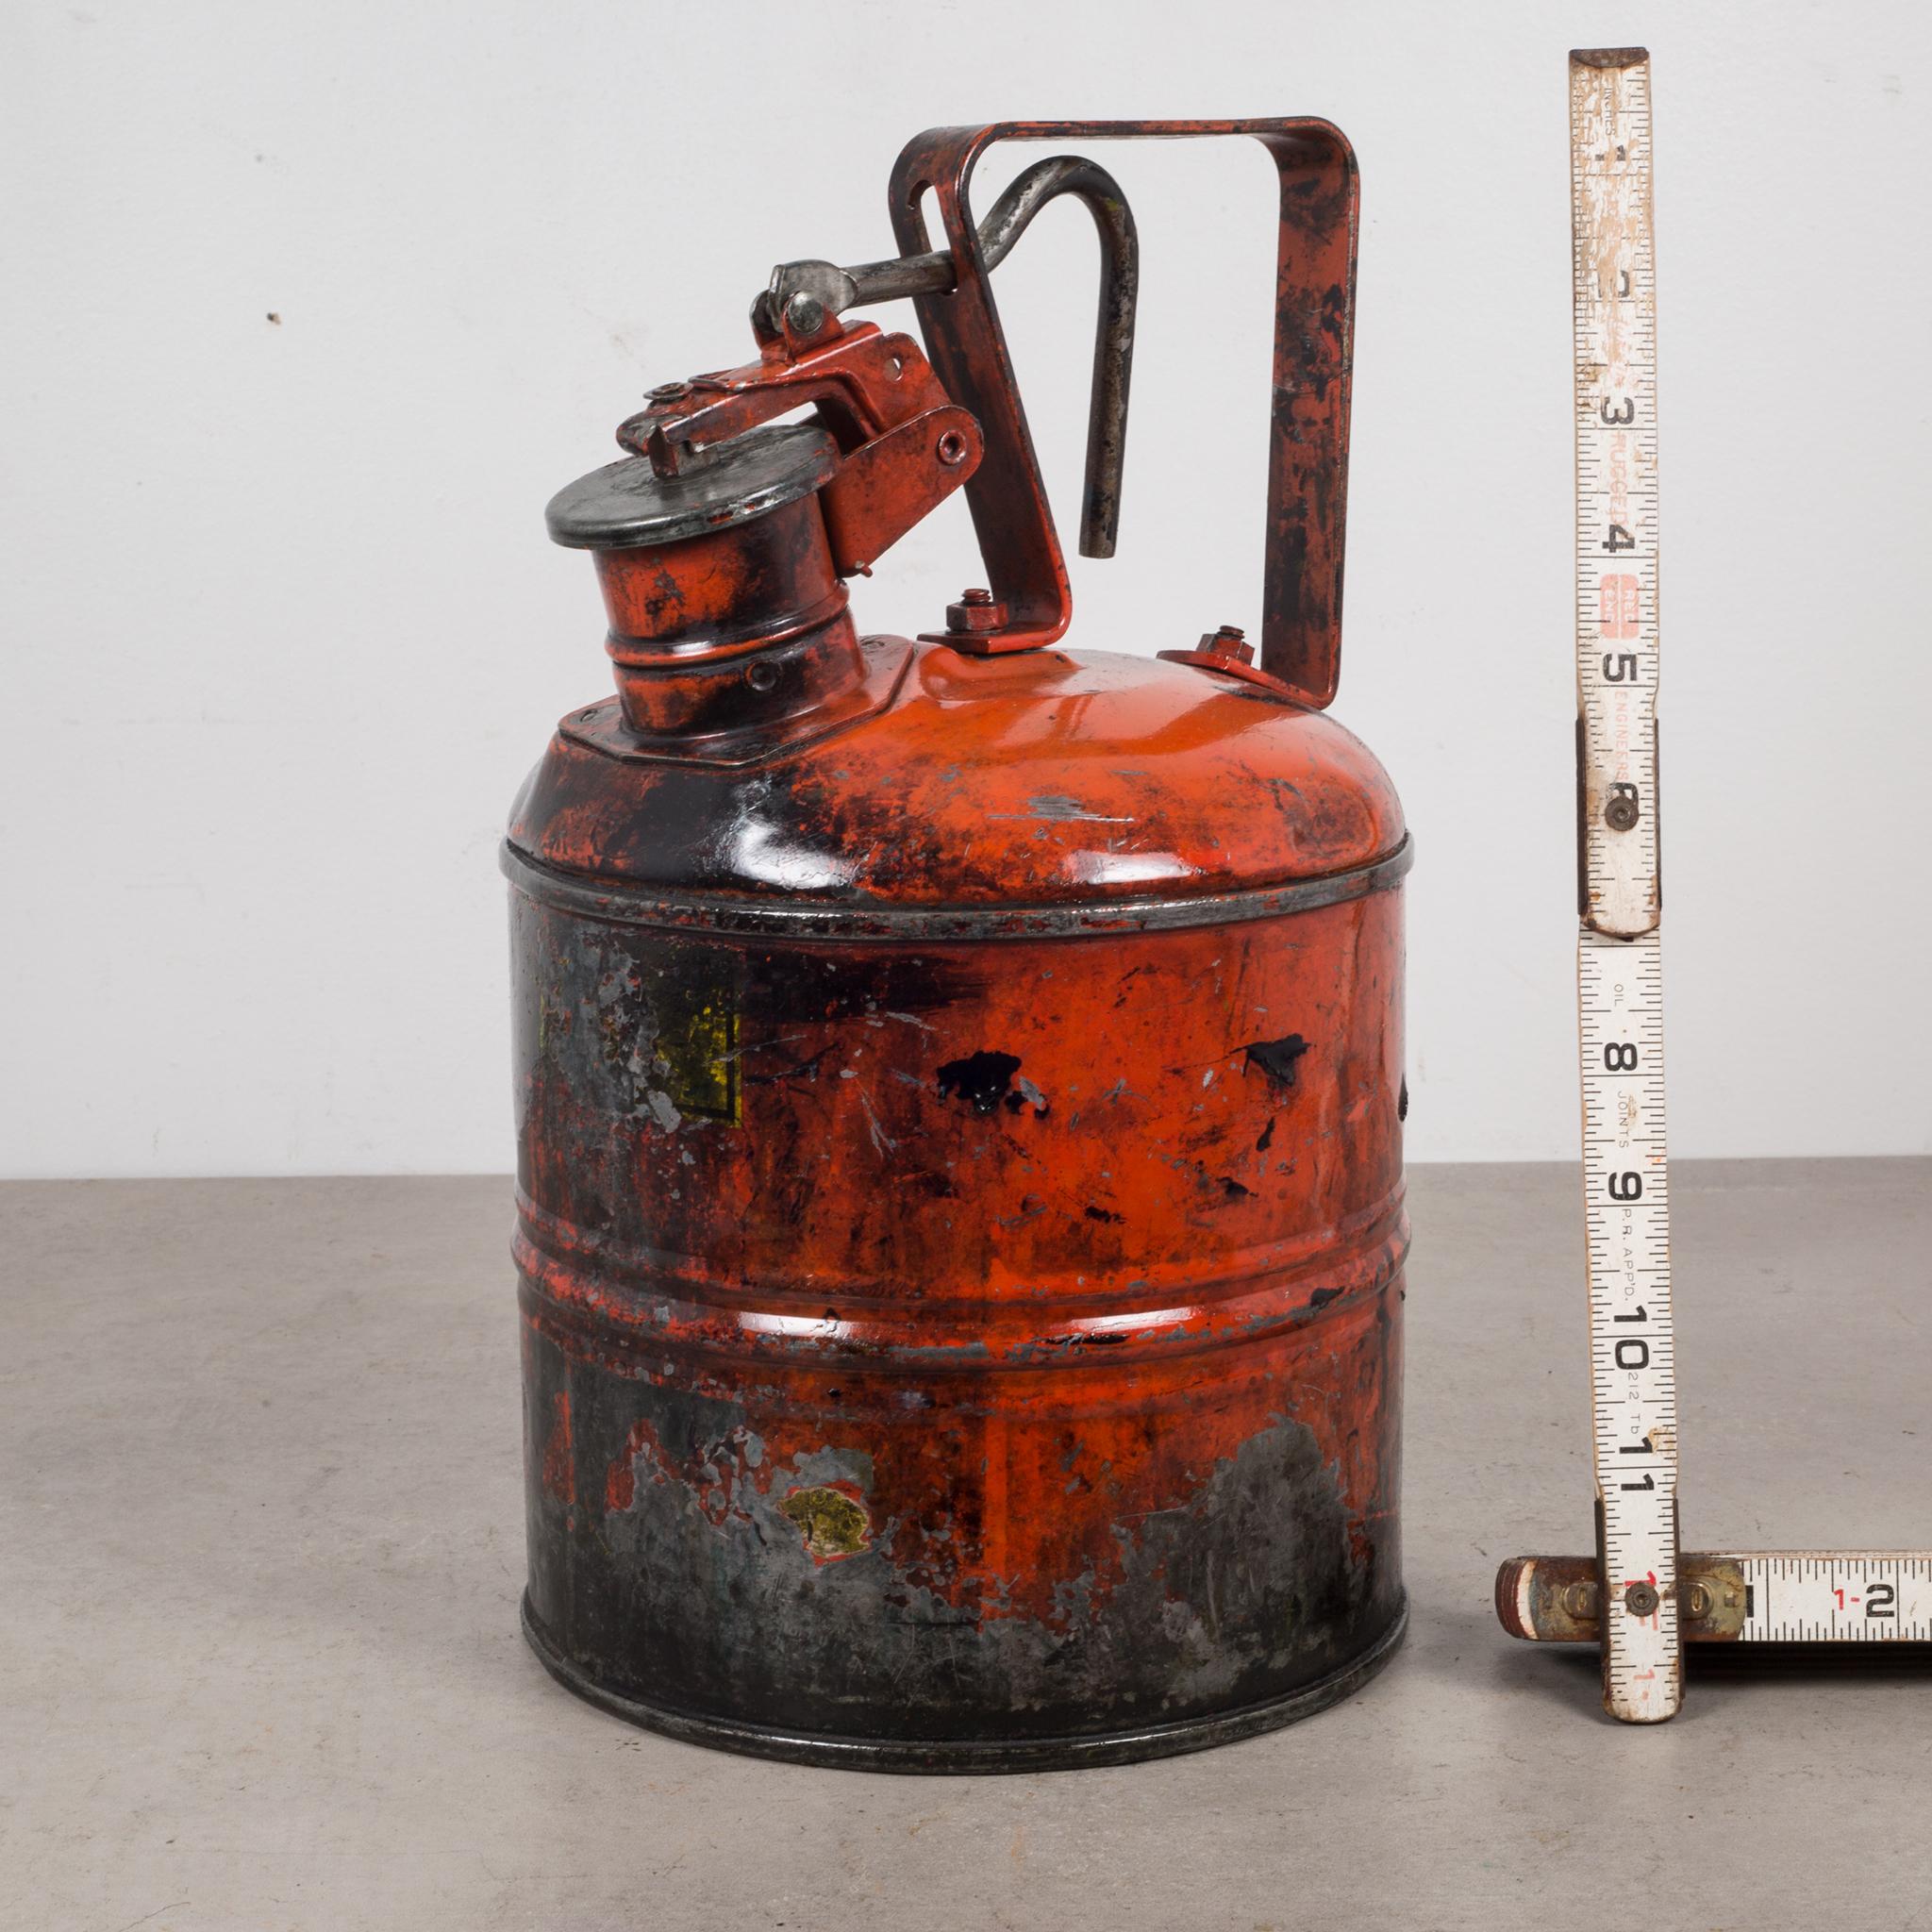 About:

Vintage red metal safety gas cans with handle grip that opens the can. Shellacked to preserve the paint and for a clean finish.

Creator: Underwriter's Laboratories Inc.
Date of manufacture: circa 1940-1950.
Materials and techniques: